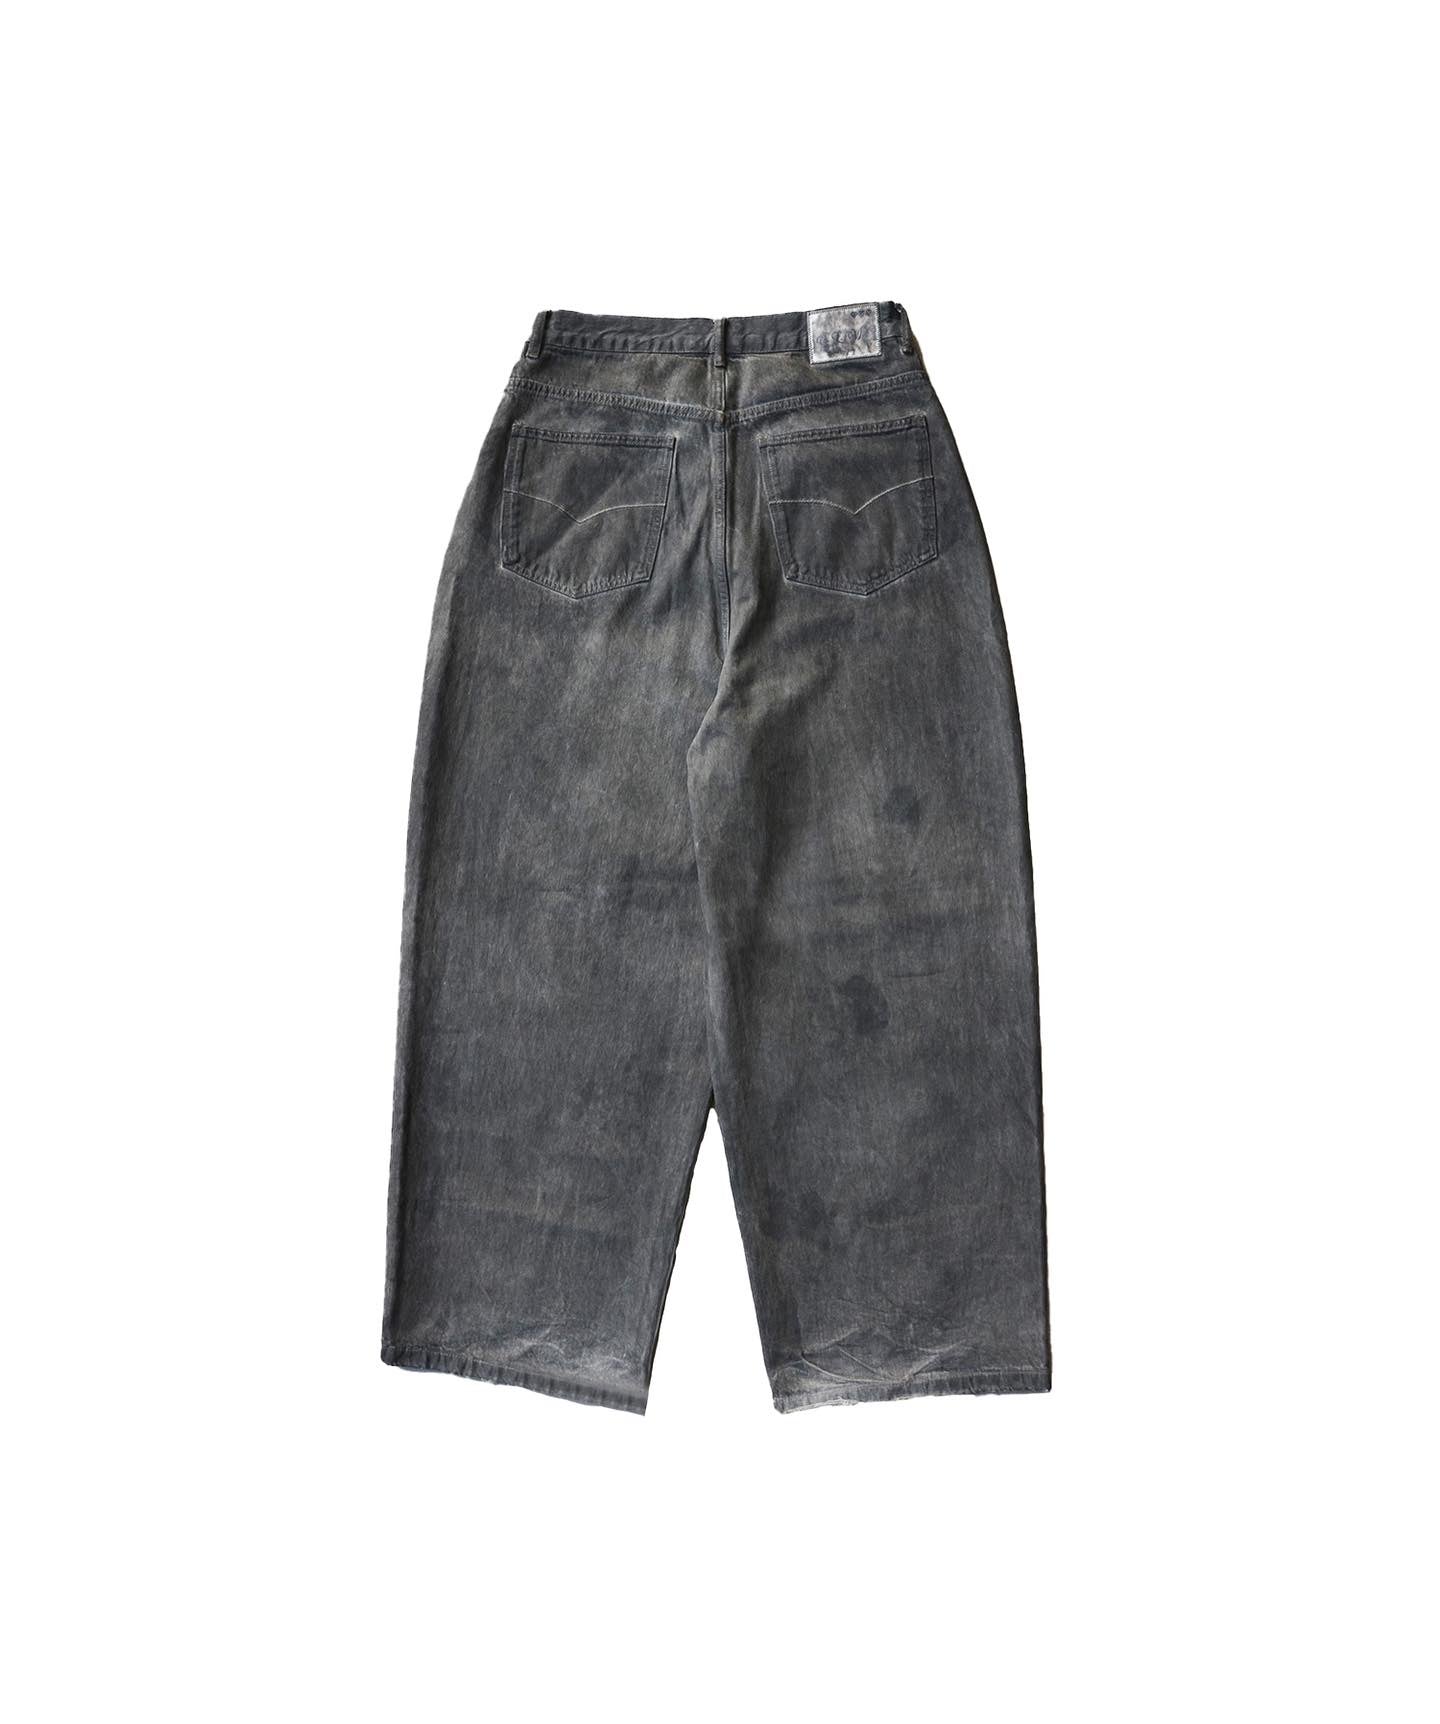 IRON GREY STAINED BAGGY DENIM